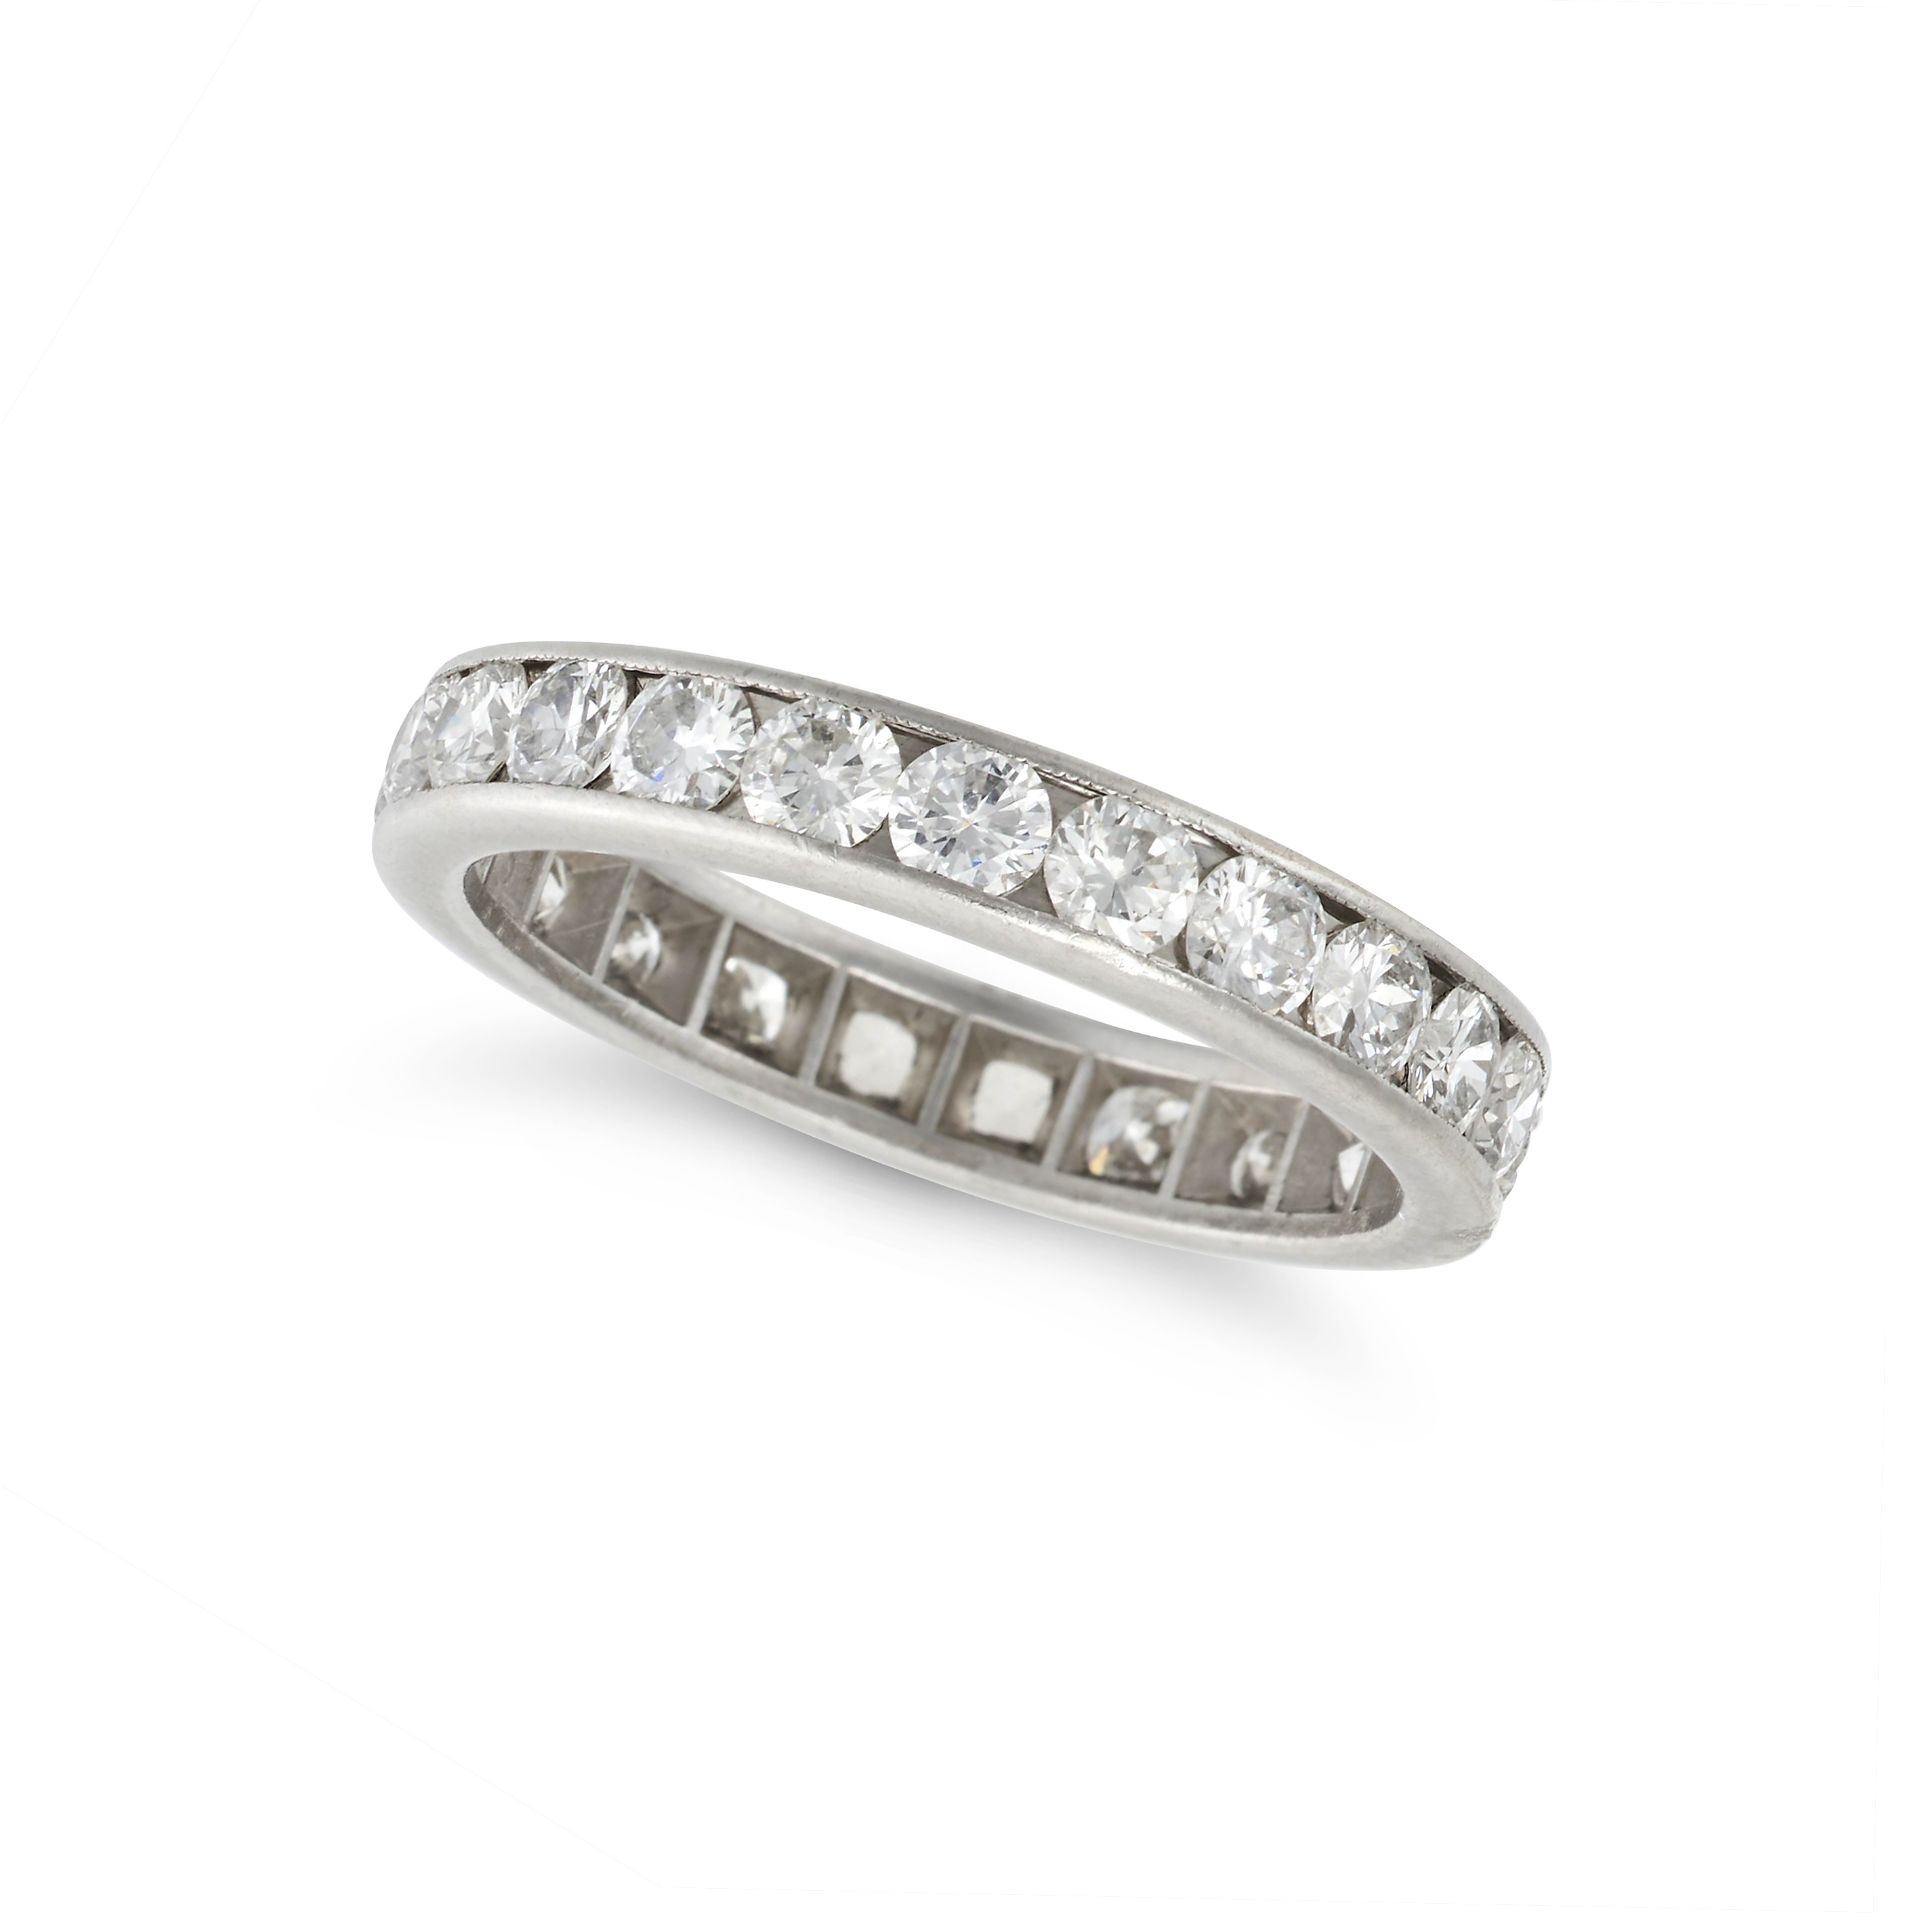 A DIAMOND FULL ETERNITY RING in platinum, set all around with a row of round brilliant cut diamon...